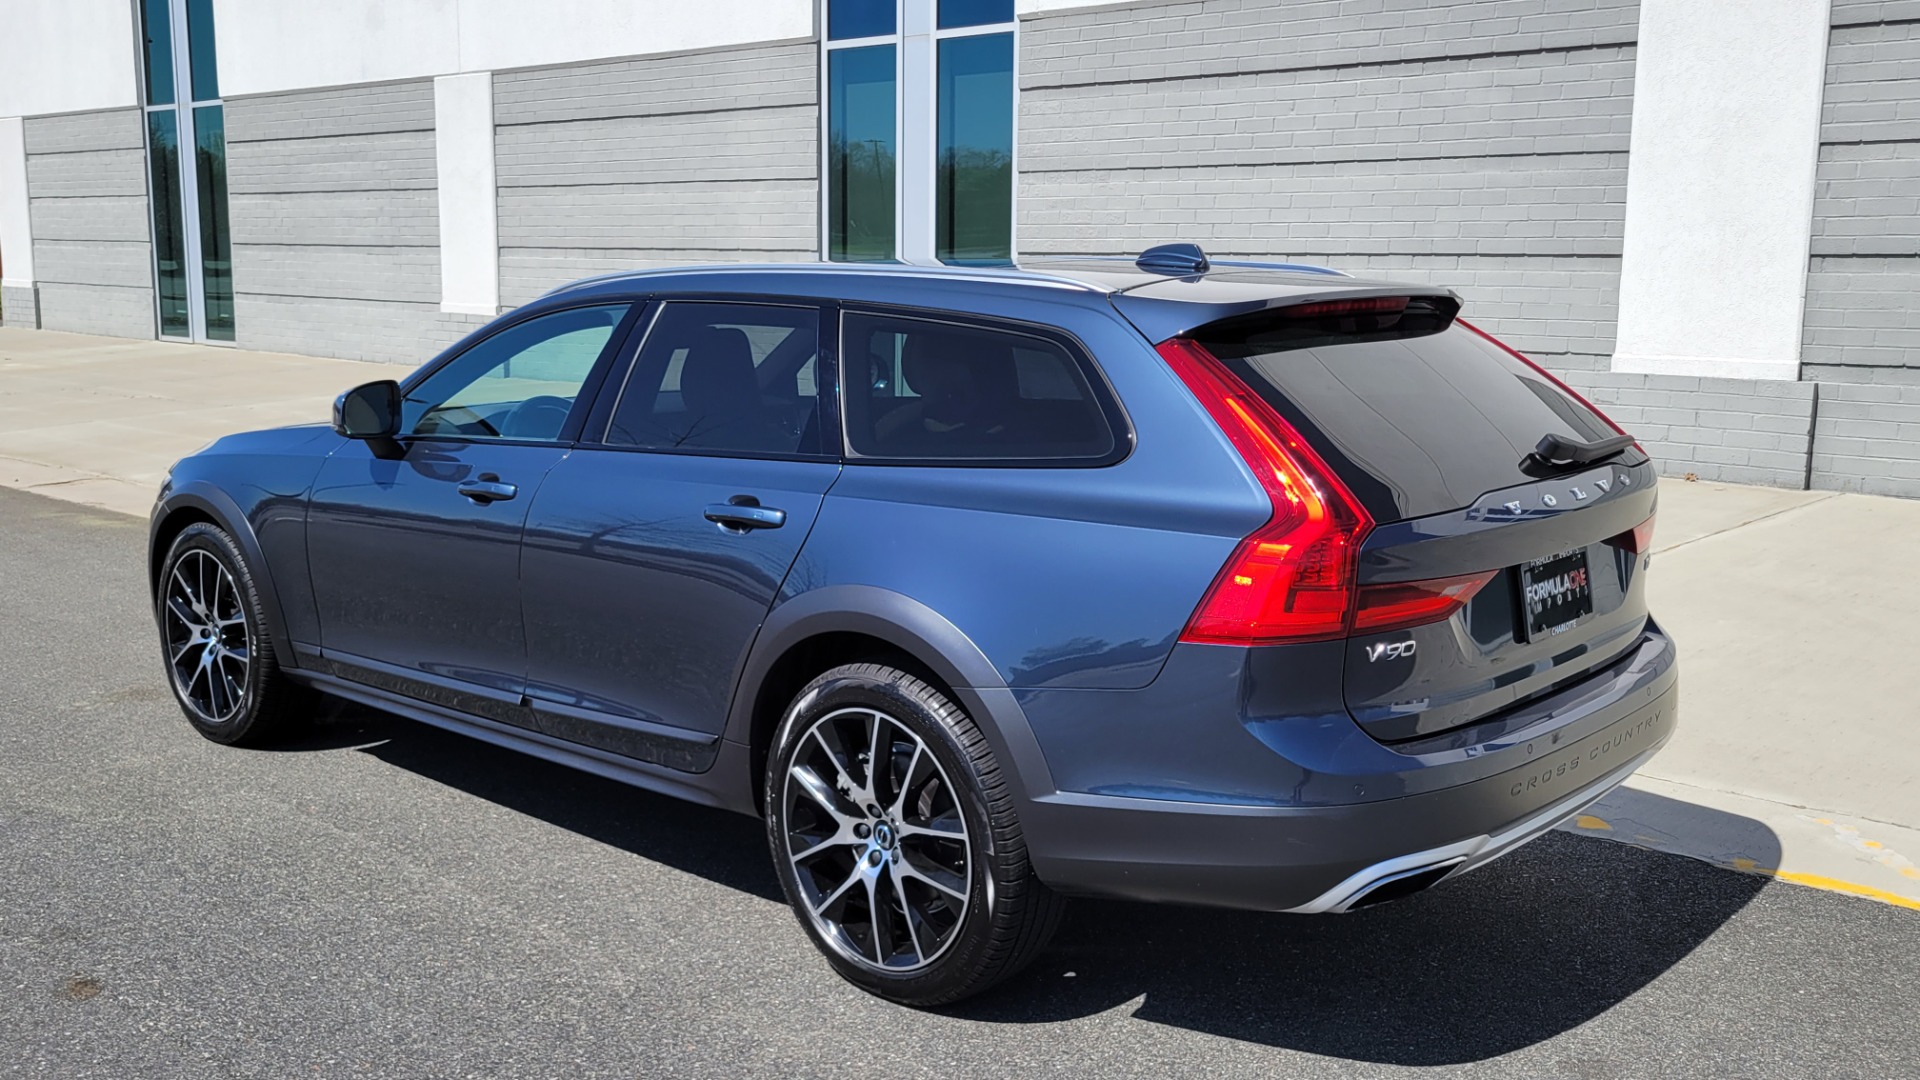 Used 2020 Volvo V90 CROSS COUNTRY T6 2.0L WAGON / AWD / HTD STS / PROTECTION PKG / REARVIEW for sale $55,000 at Formula Imports in Charlotte NC 28227 6